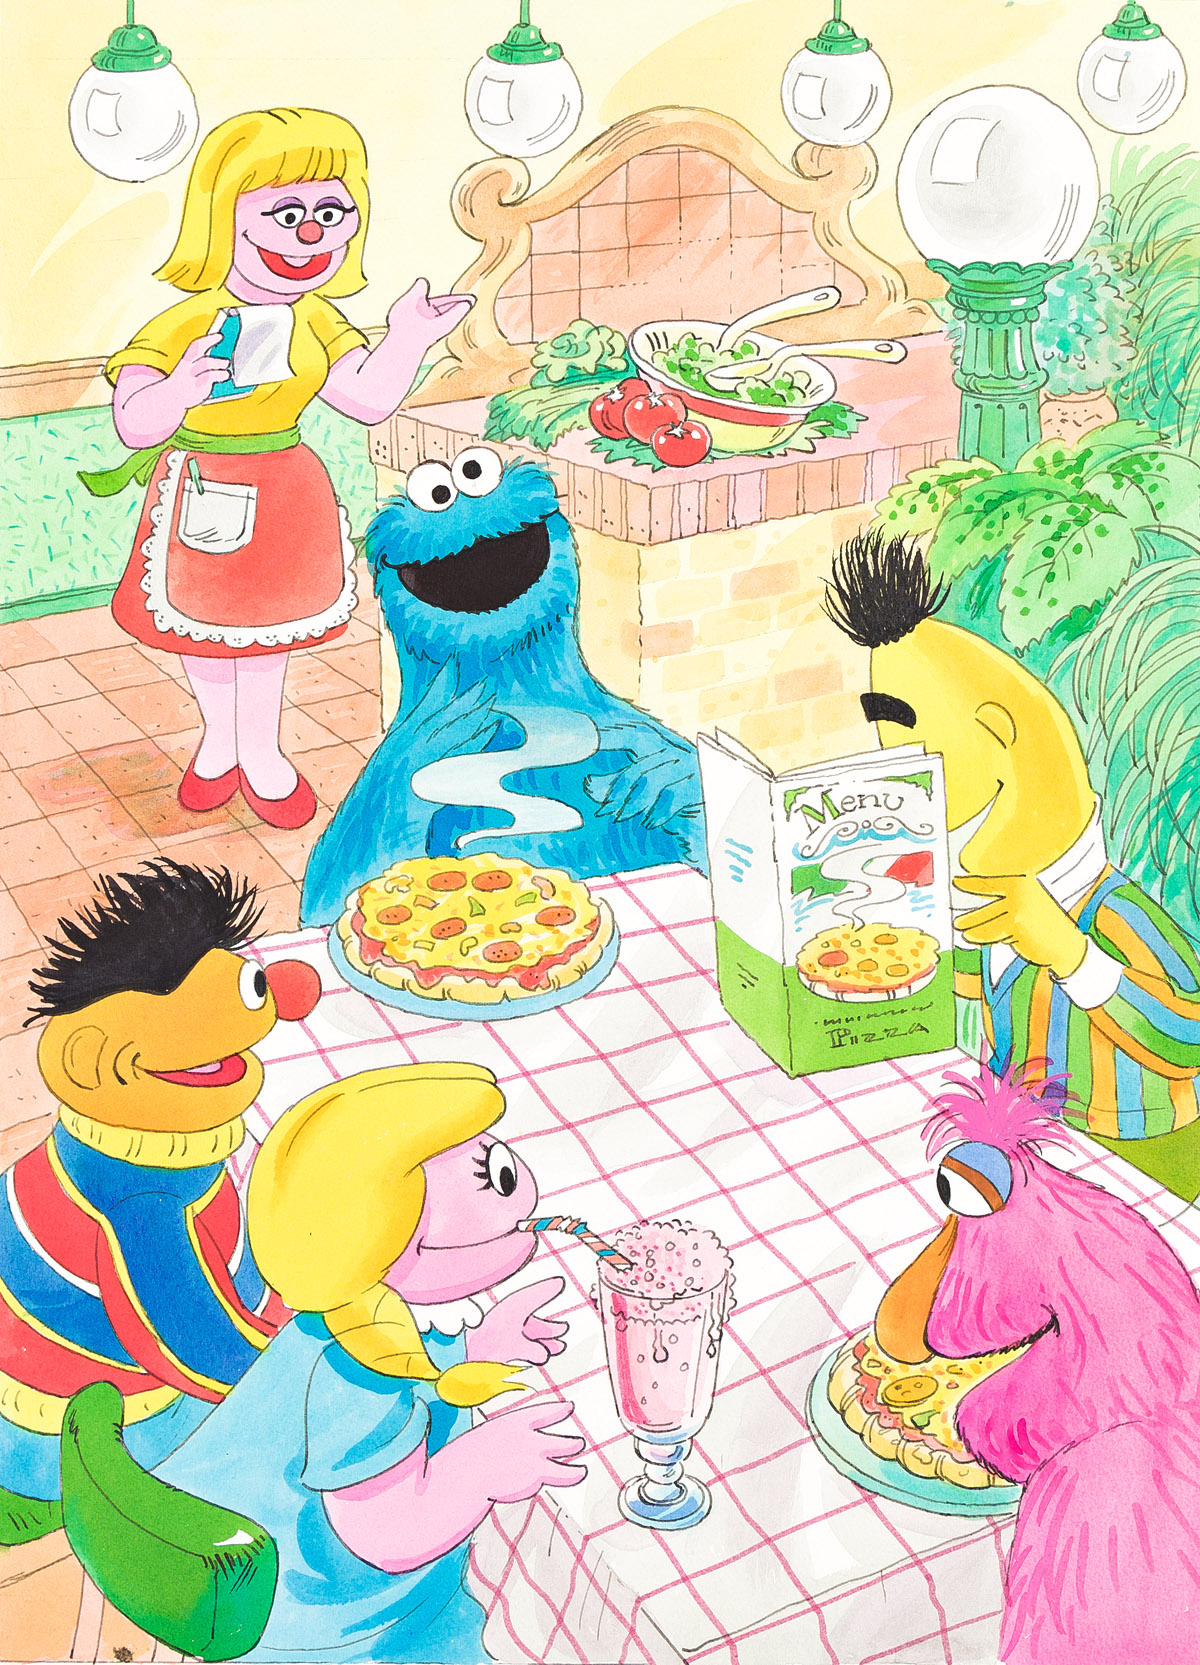 (SESAME STREET) Bert, Ernie, and Cookie Monster at a restaurant with friends.